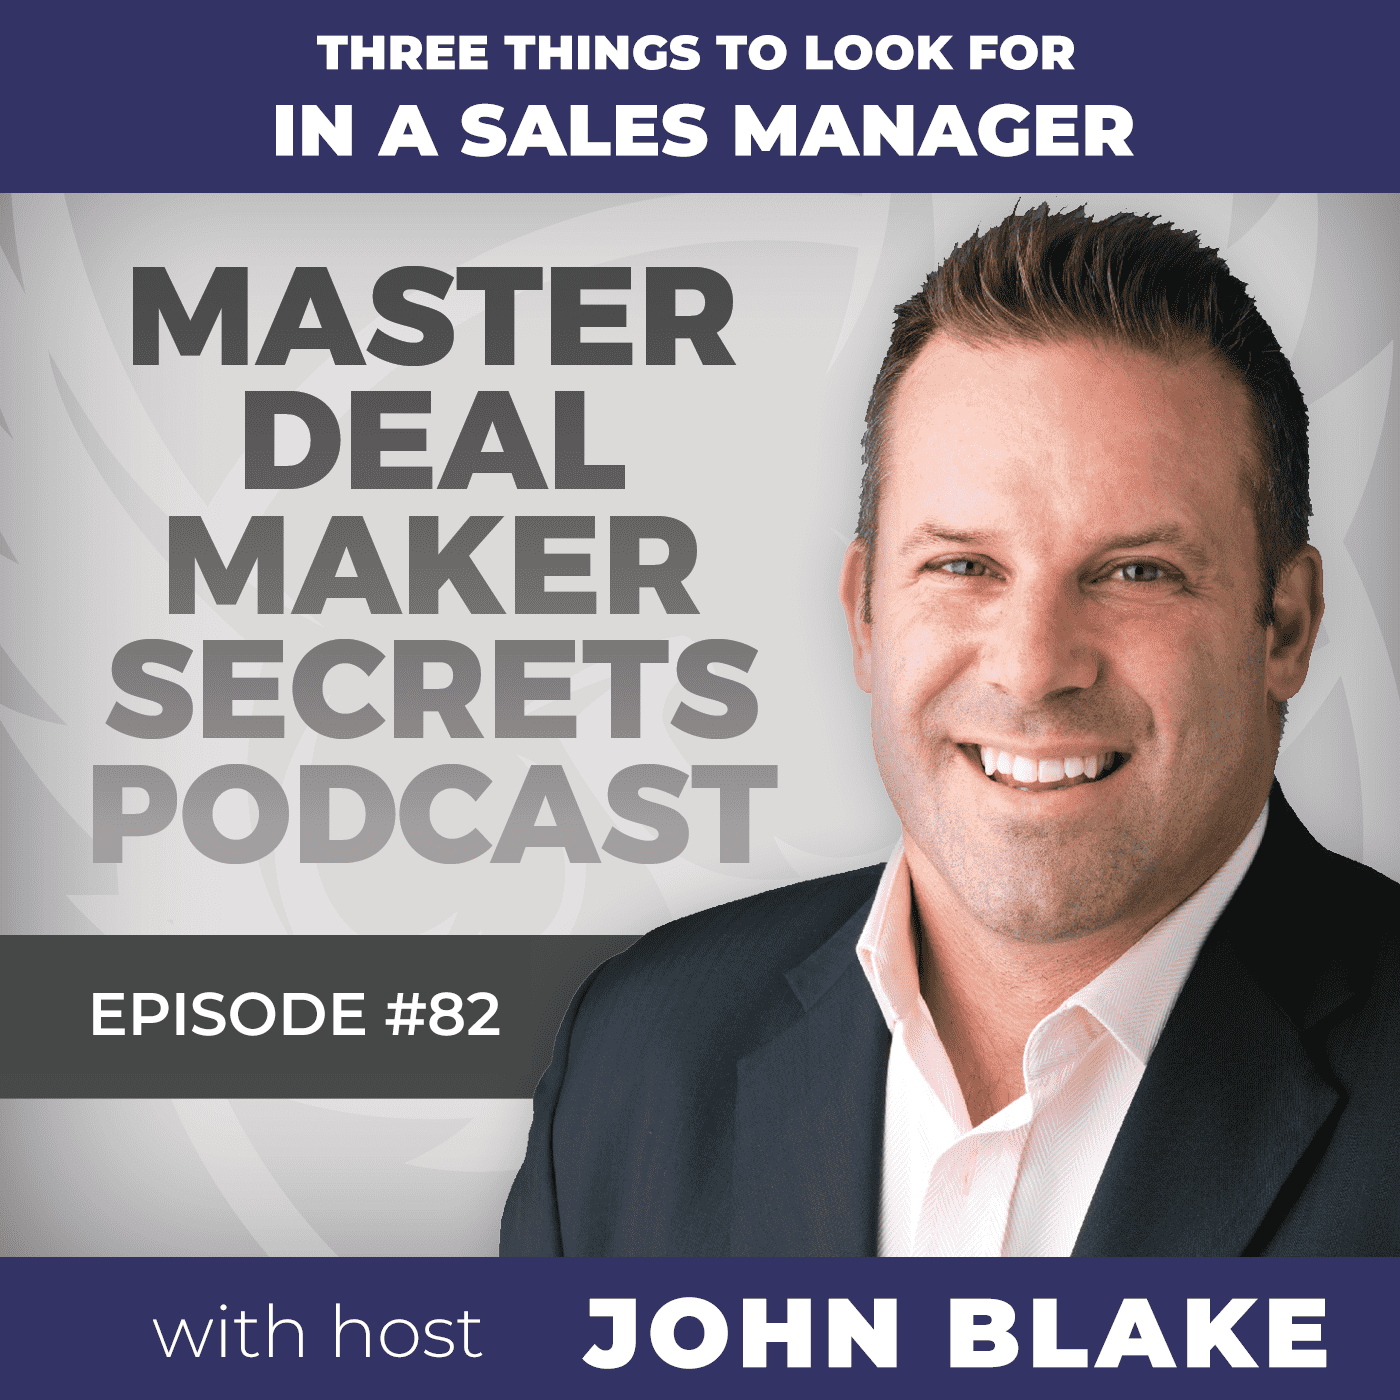 John Blake 3 Things to Look For in a Sales Manager